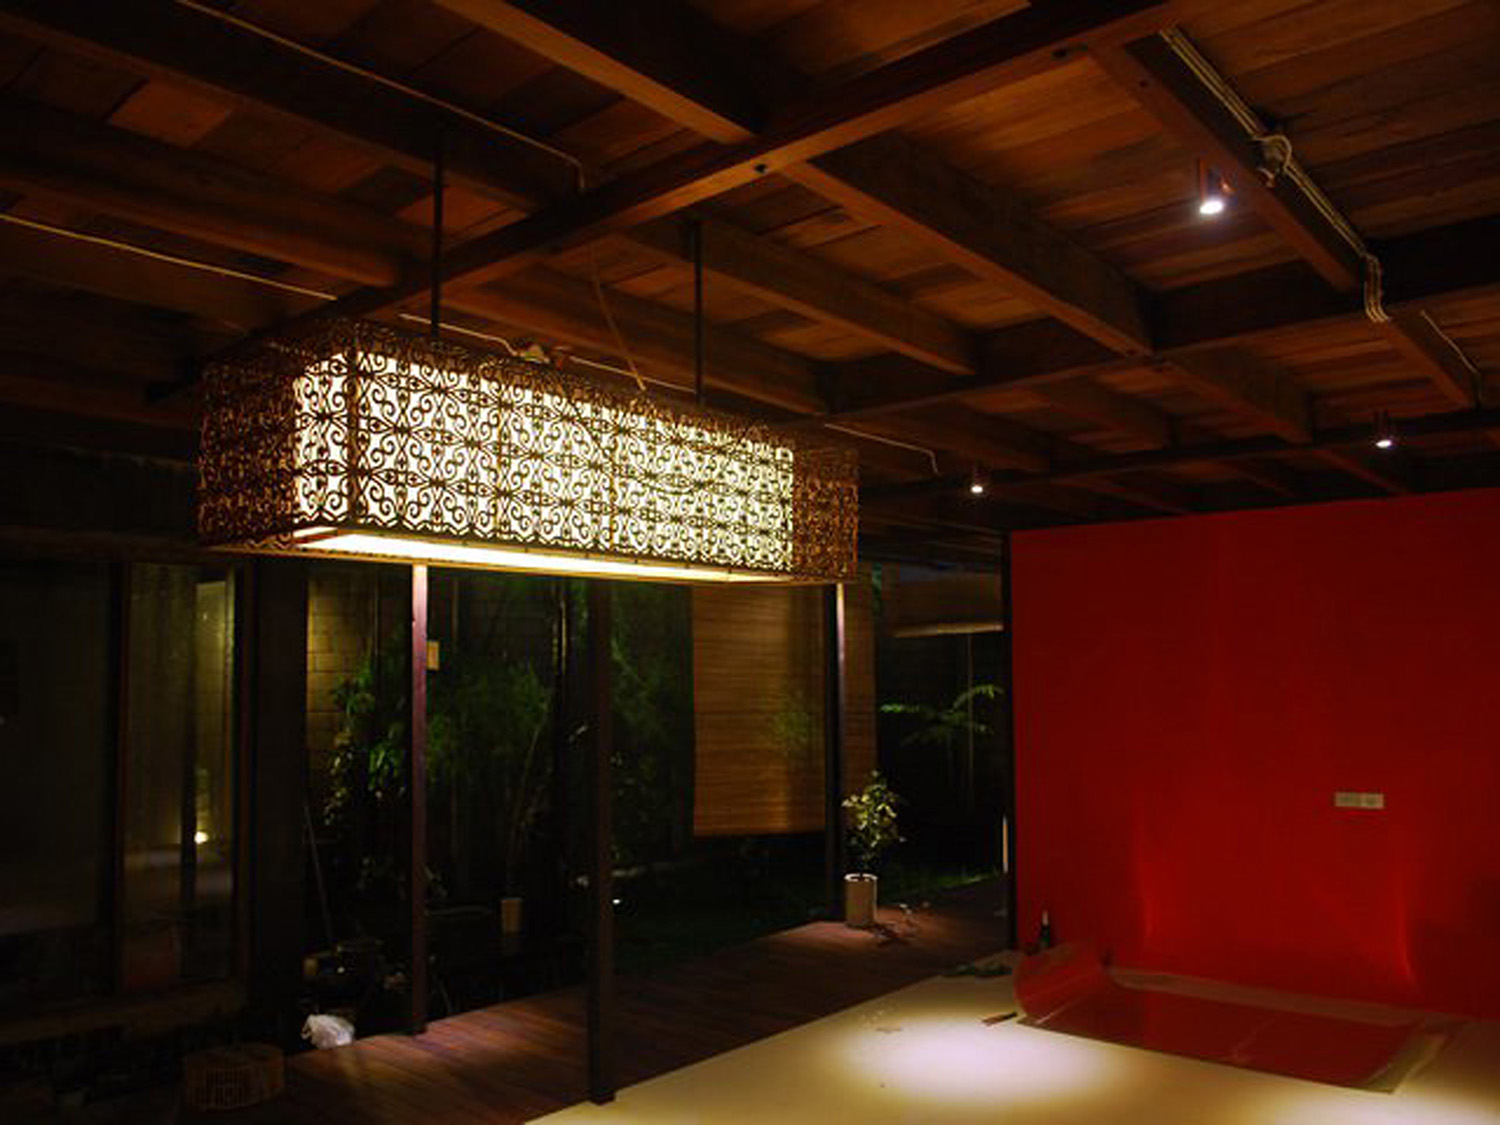 The lamp armature in the family room was designed to imitate the Dayak's ornament "akar kelait"